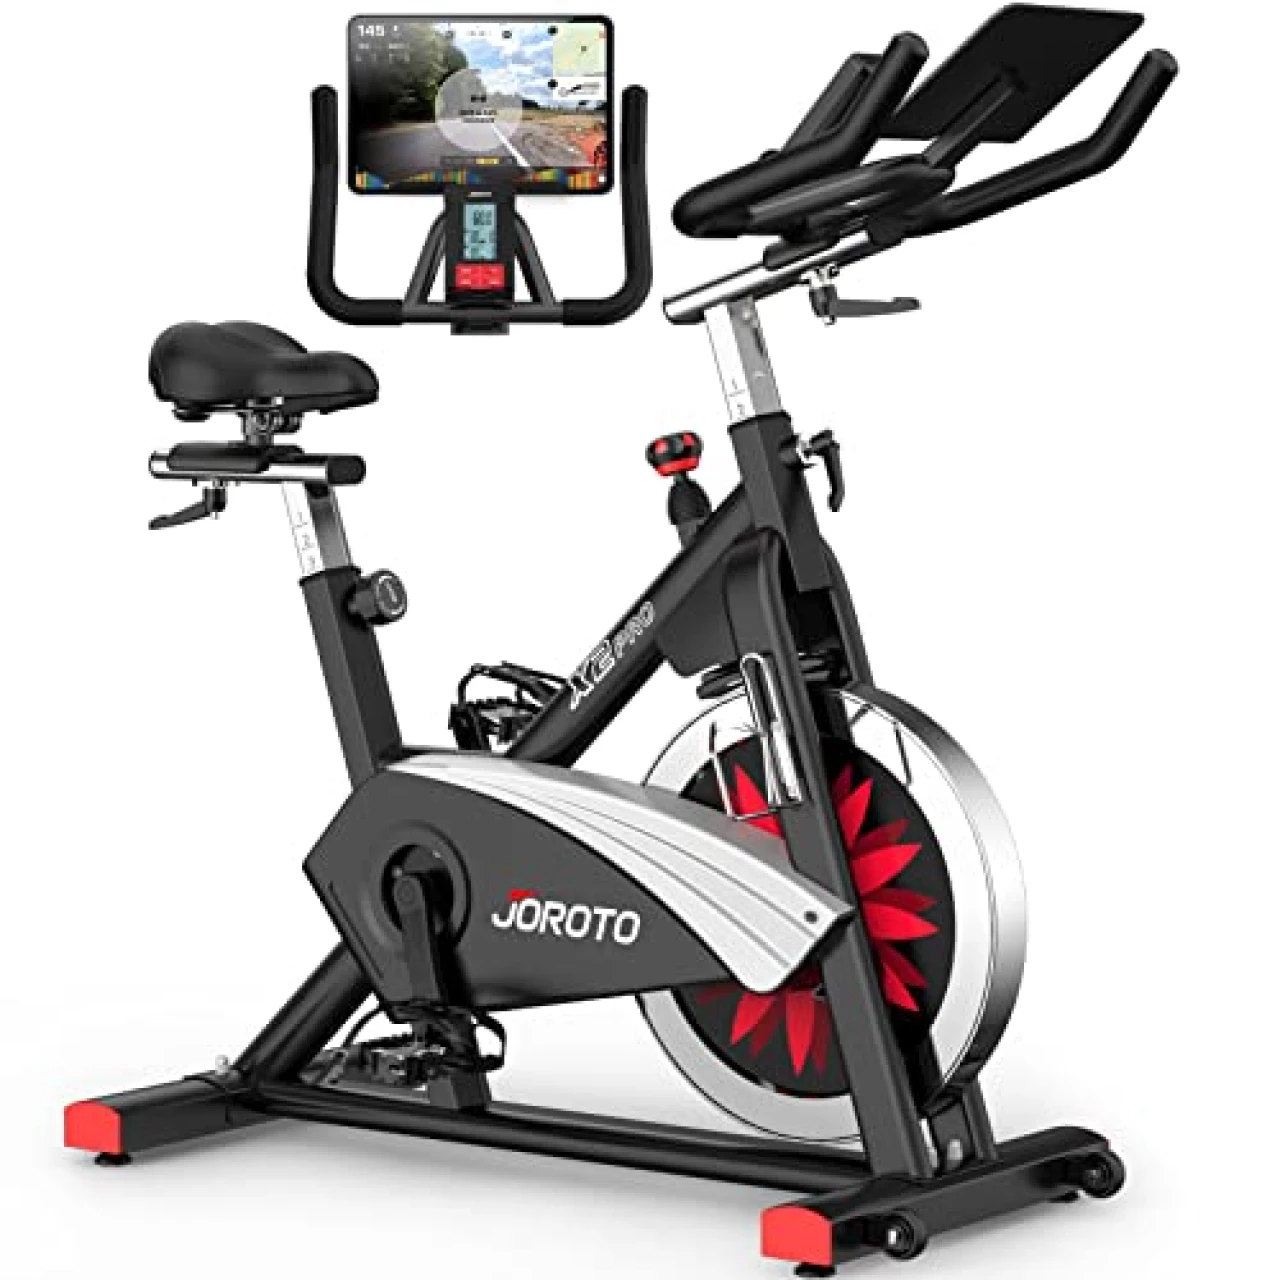 JOROTO X2PRO Bluetooth Exercise Bike, Stationary Indoor Cycling Bike with Readable 100 Levels Magnetic Resistance, Plus 12.6 inch Tablet Bracket